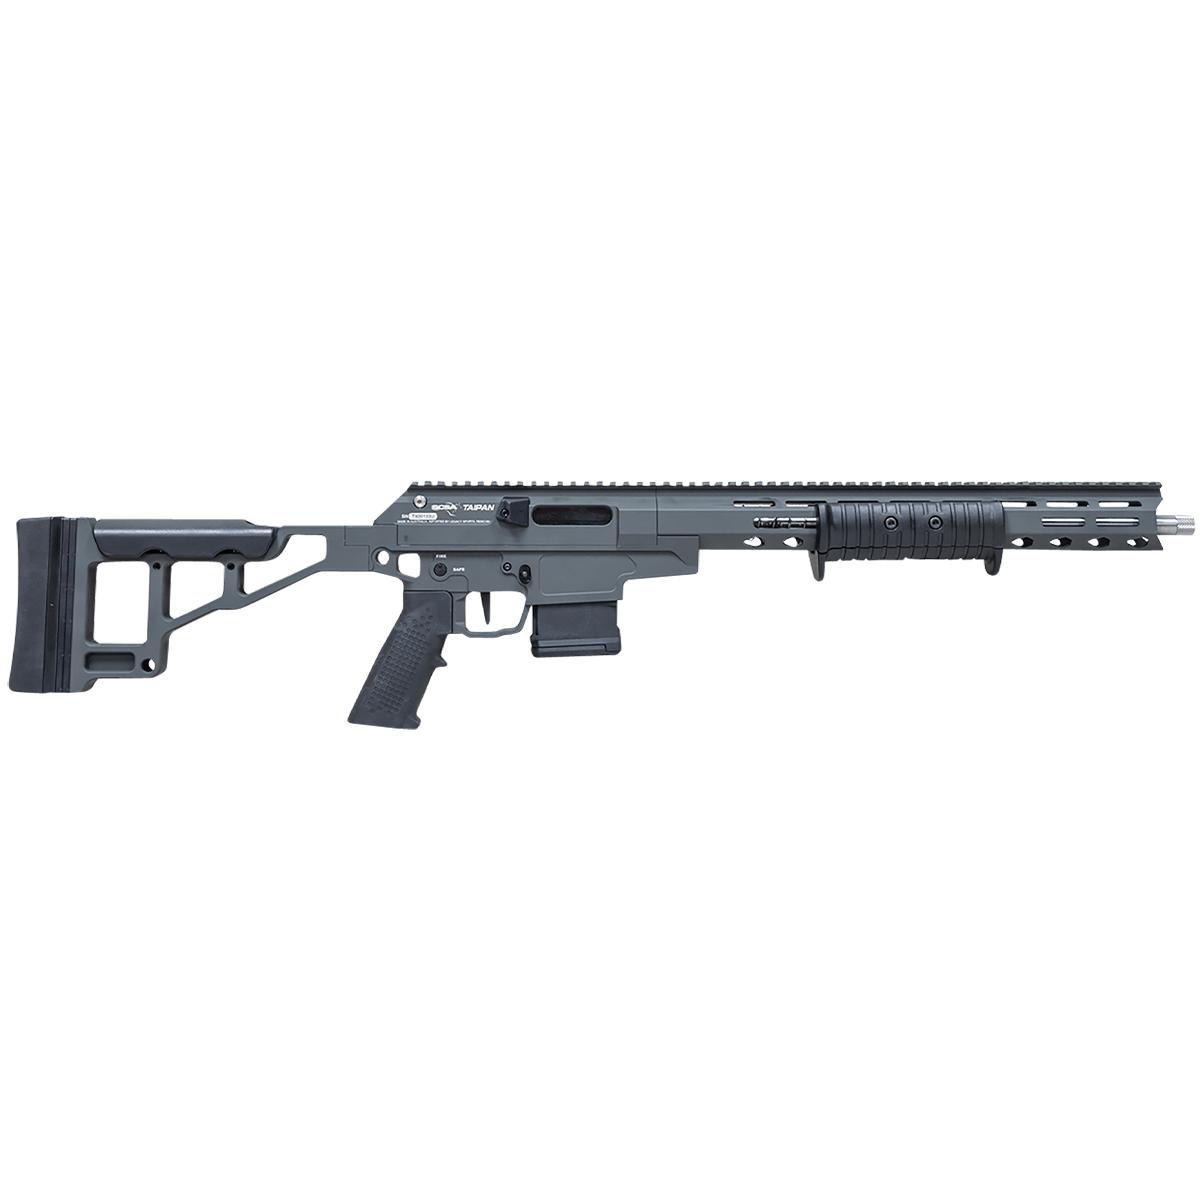 Citadel CITTPN223GRY Taipan X Pump Action 223 Wylde 10+1 16.50 Stainless  Threaded, Dark Gray, M-Lok Handguard, Chassis with Skeletonized Stock, A2  Style Grip, Flat-Face Trigger